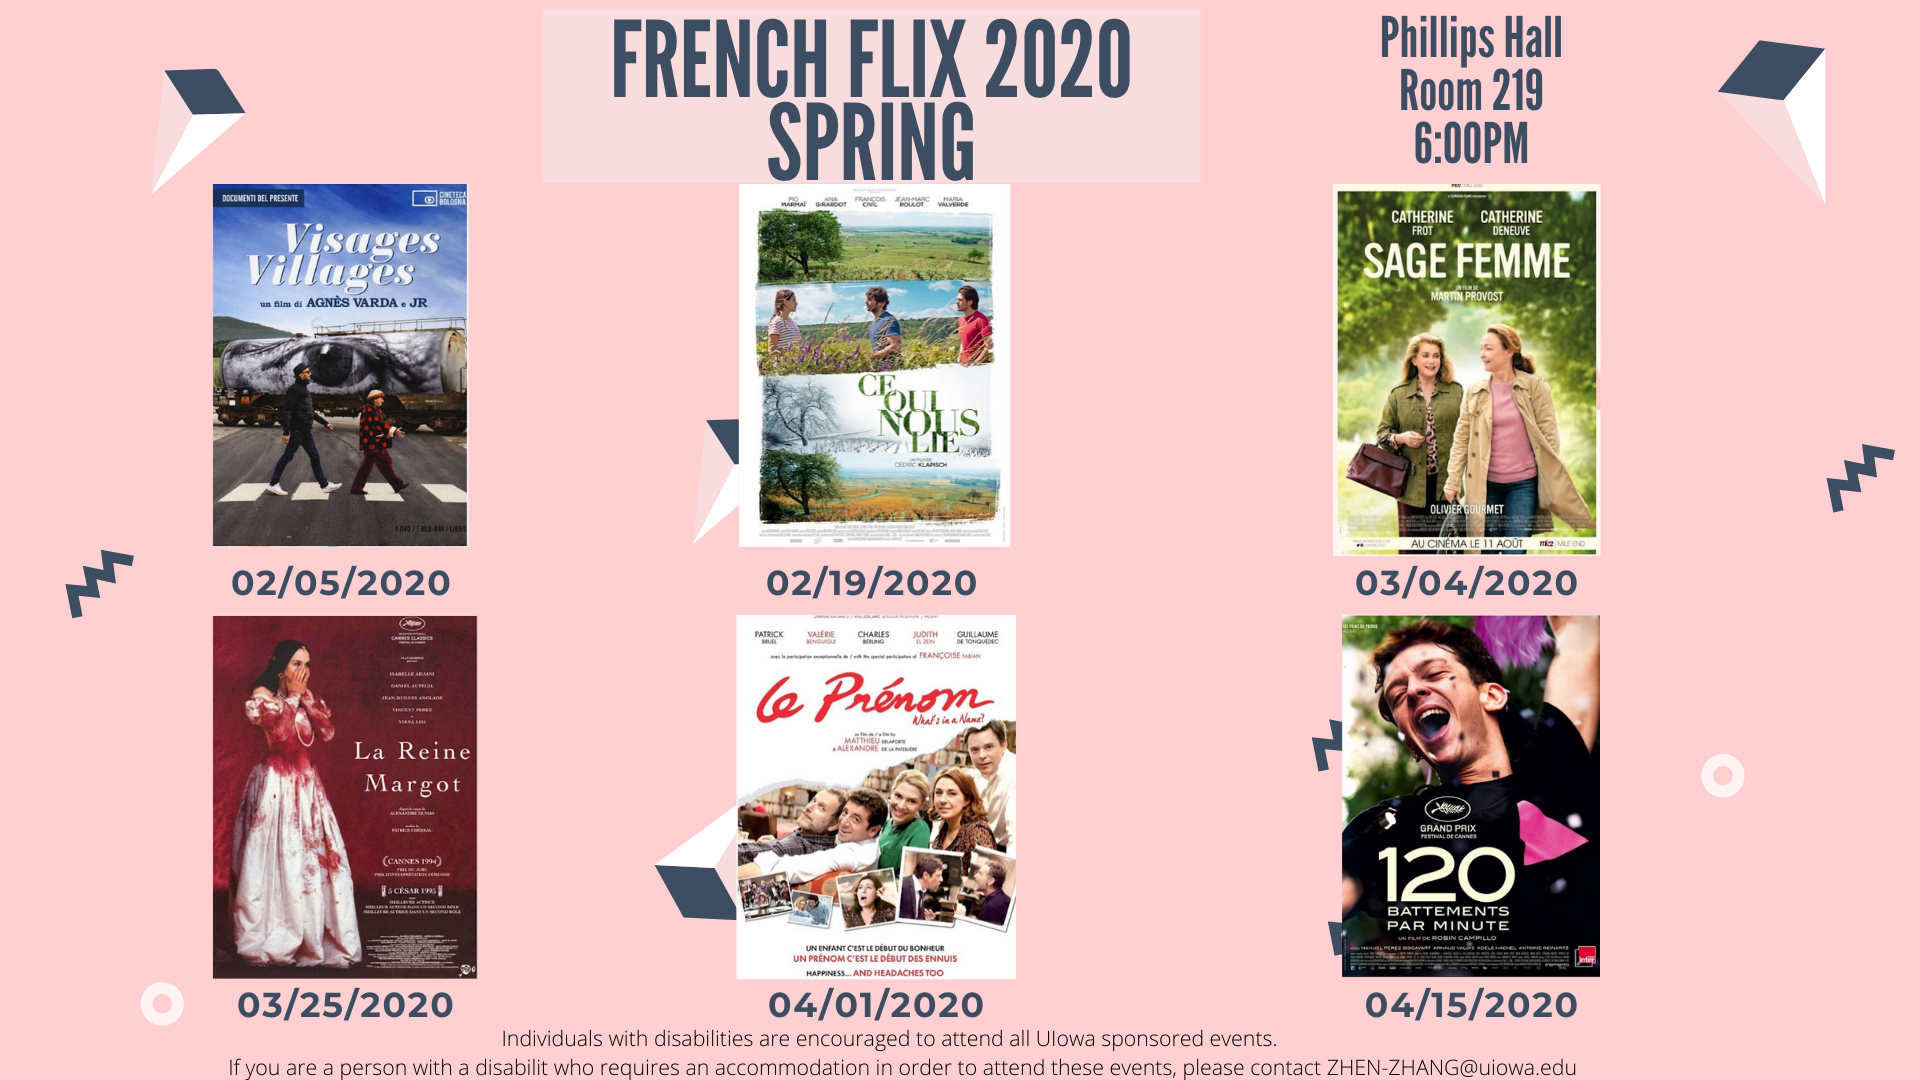 French Flix 2020 Spring. Philips Hall, Room 219, 6:00PM. Visages Villages - 02/05/2020. Ce Qui Nous Lie - 02/19/2020. Sage Femme - 03/04/2020. La Reine Margot - 03/25/2020. Le Prénom - 04/01/2020. 120 Battements Par Minute - 04/15-2020. Individuals with disabilities are encourage to attend all Iowa sponsored events. If you are a person with a disability who requires an accommodation in order to attend these events, please contact ZHEN-ZHANG@uiowa.edu.